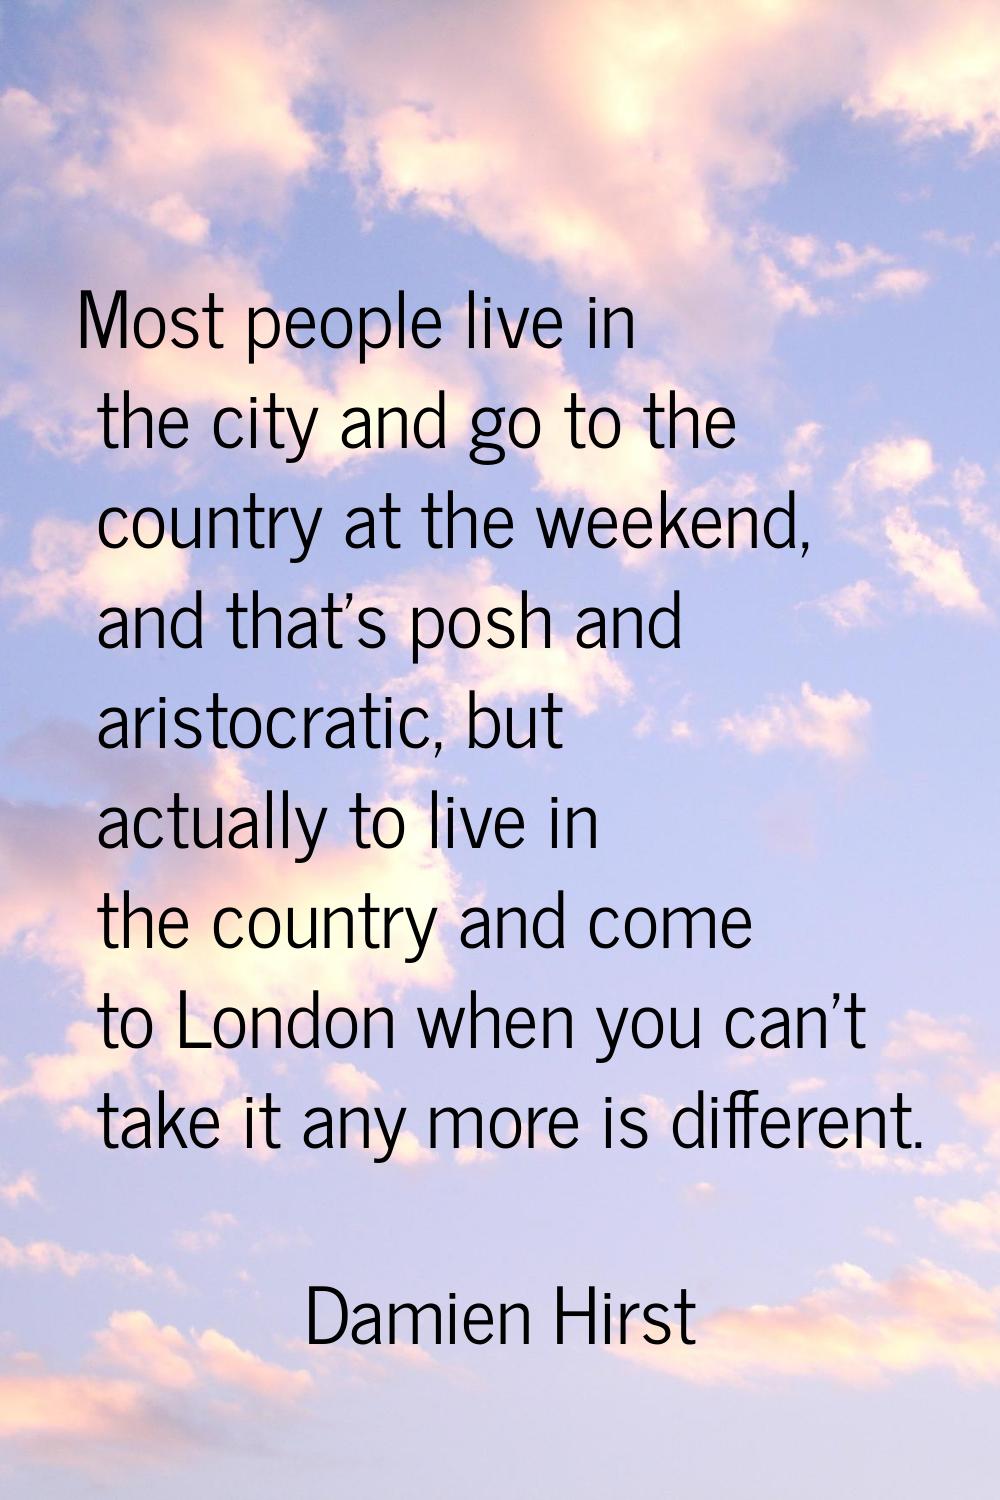 Most people live in the city and go to the country at the weekend, and that's posh and aristocratic